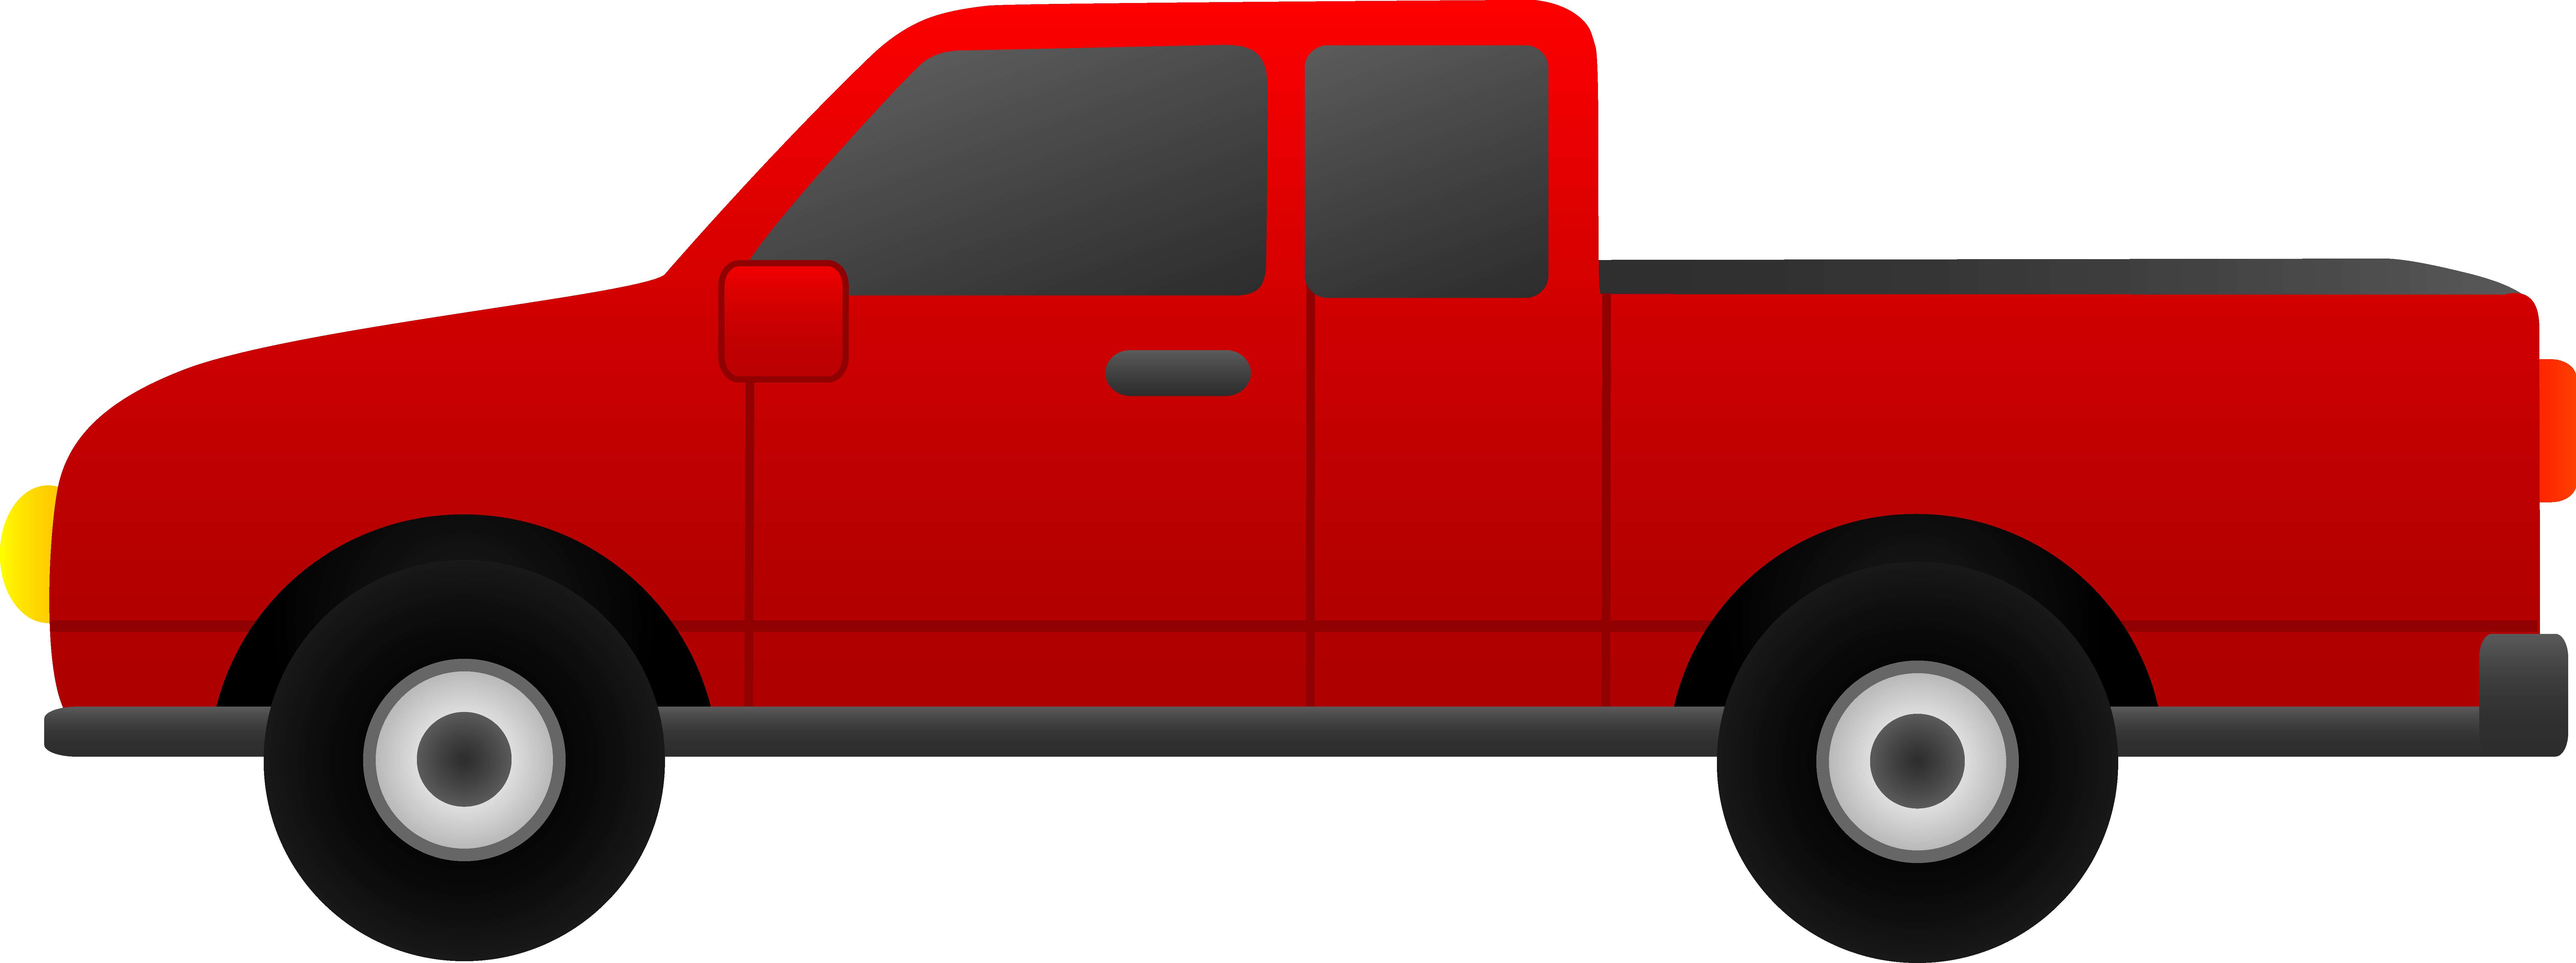 Pickup Truck Clipart - Free Clipart Images